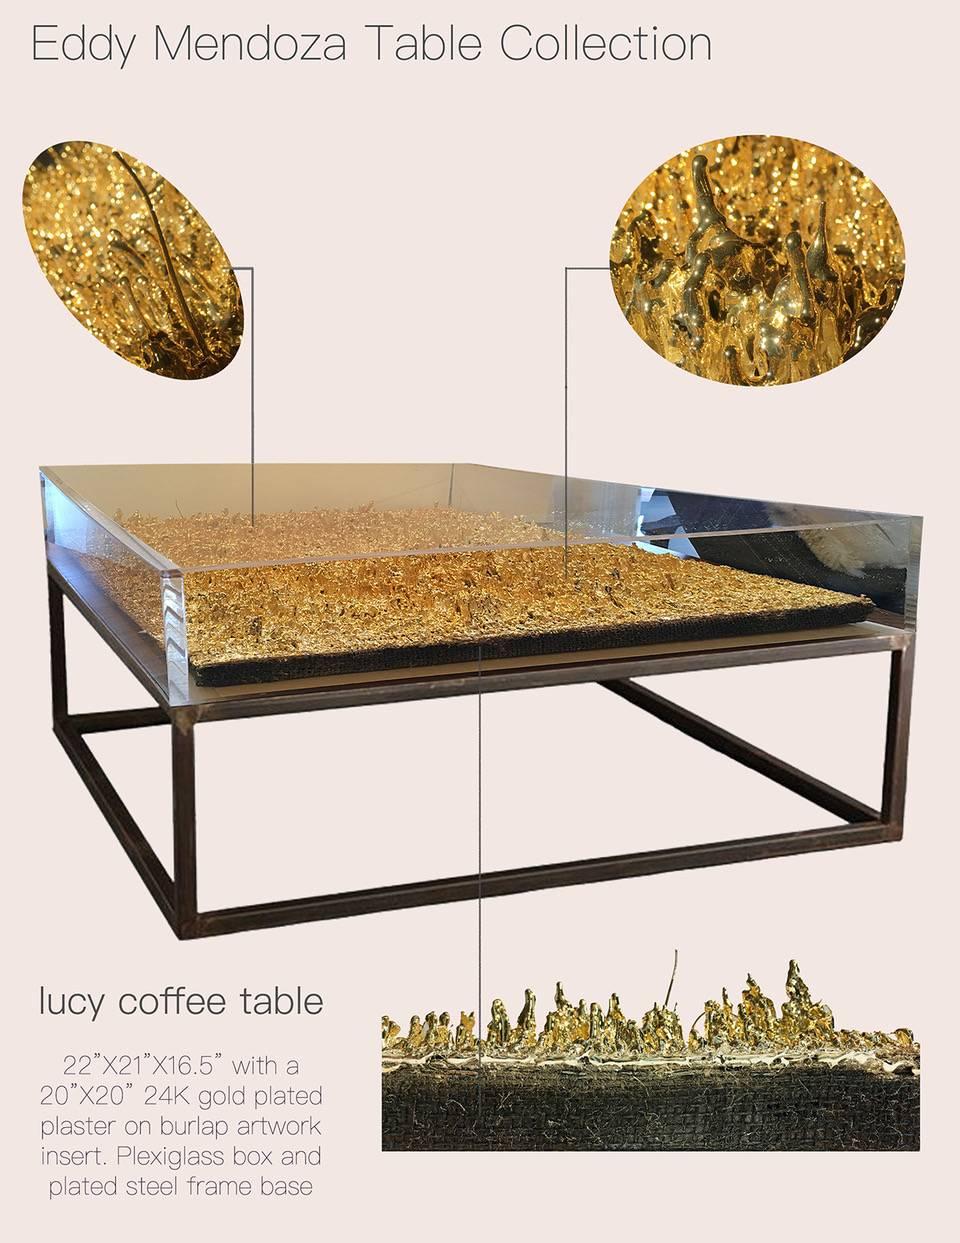 Coffee table designed to carry 3D metal art pieces. Presented at Architectural Digest Design show in 2018All artworks are 20